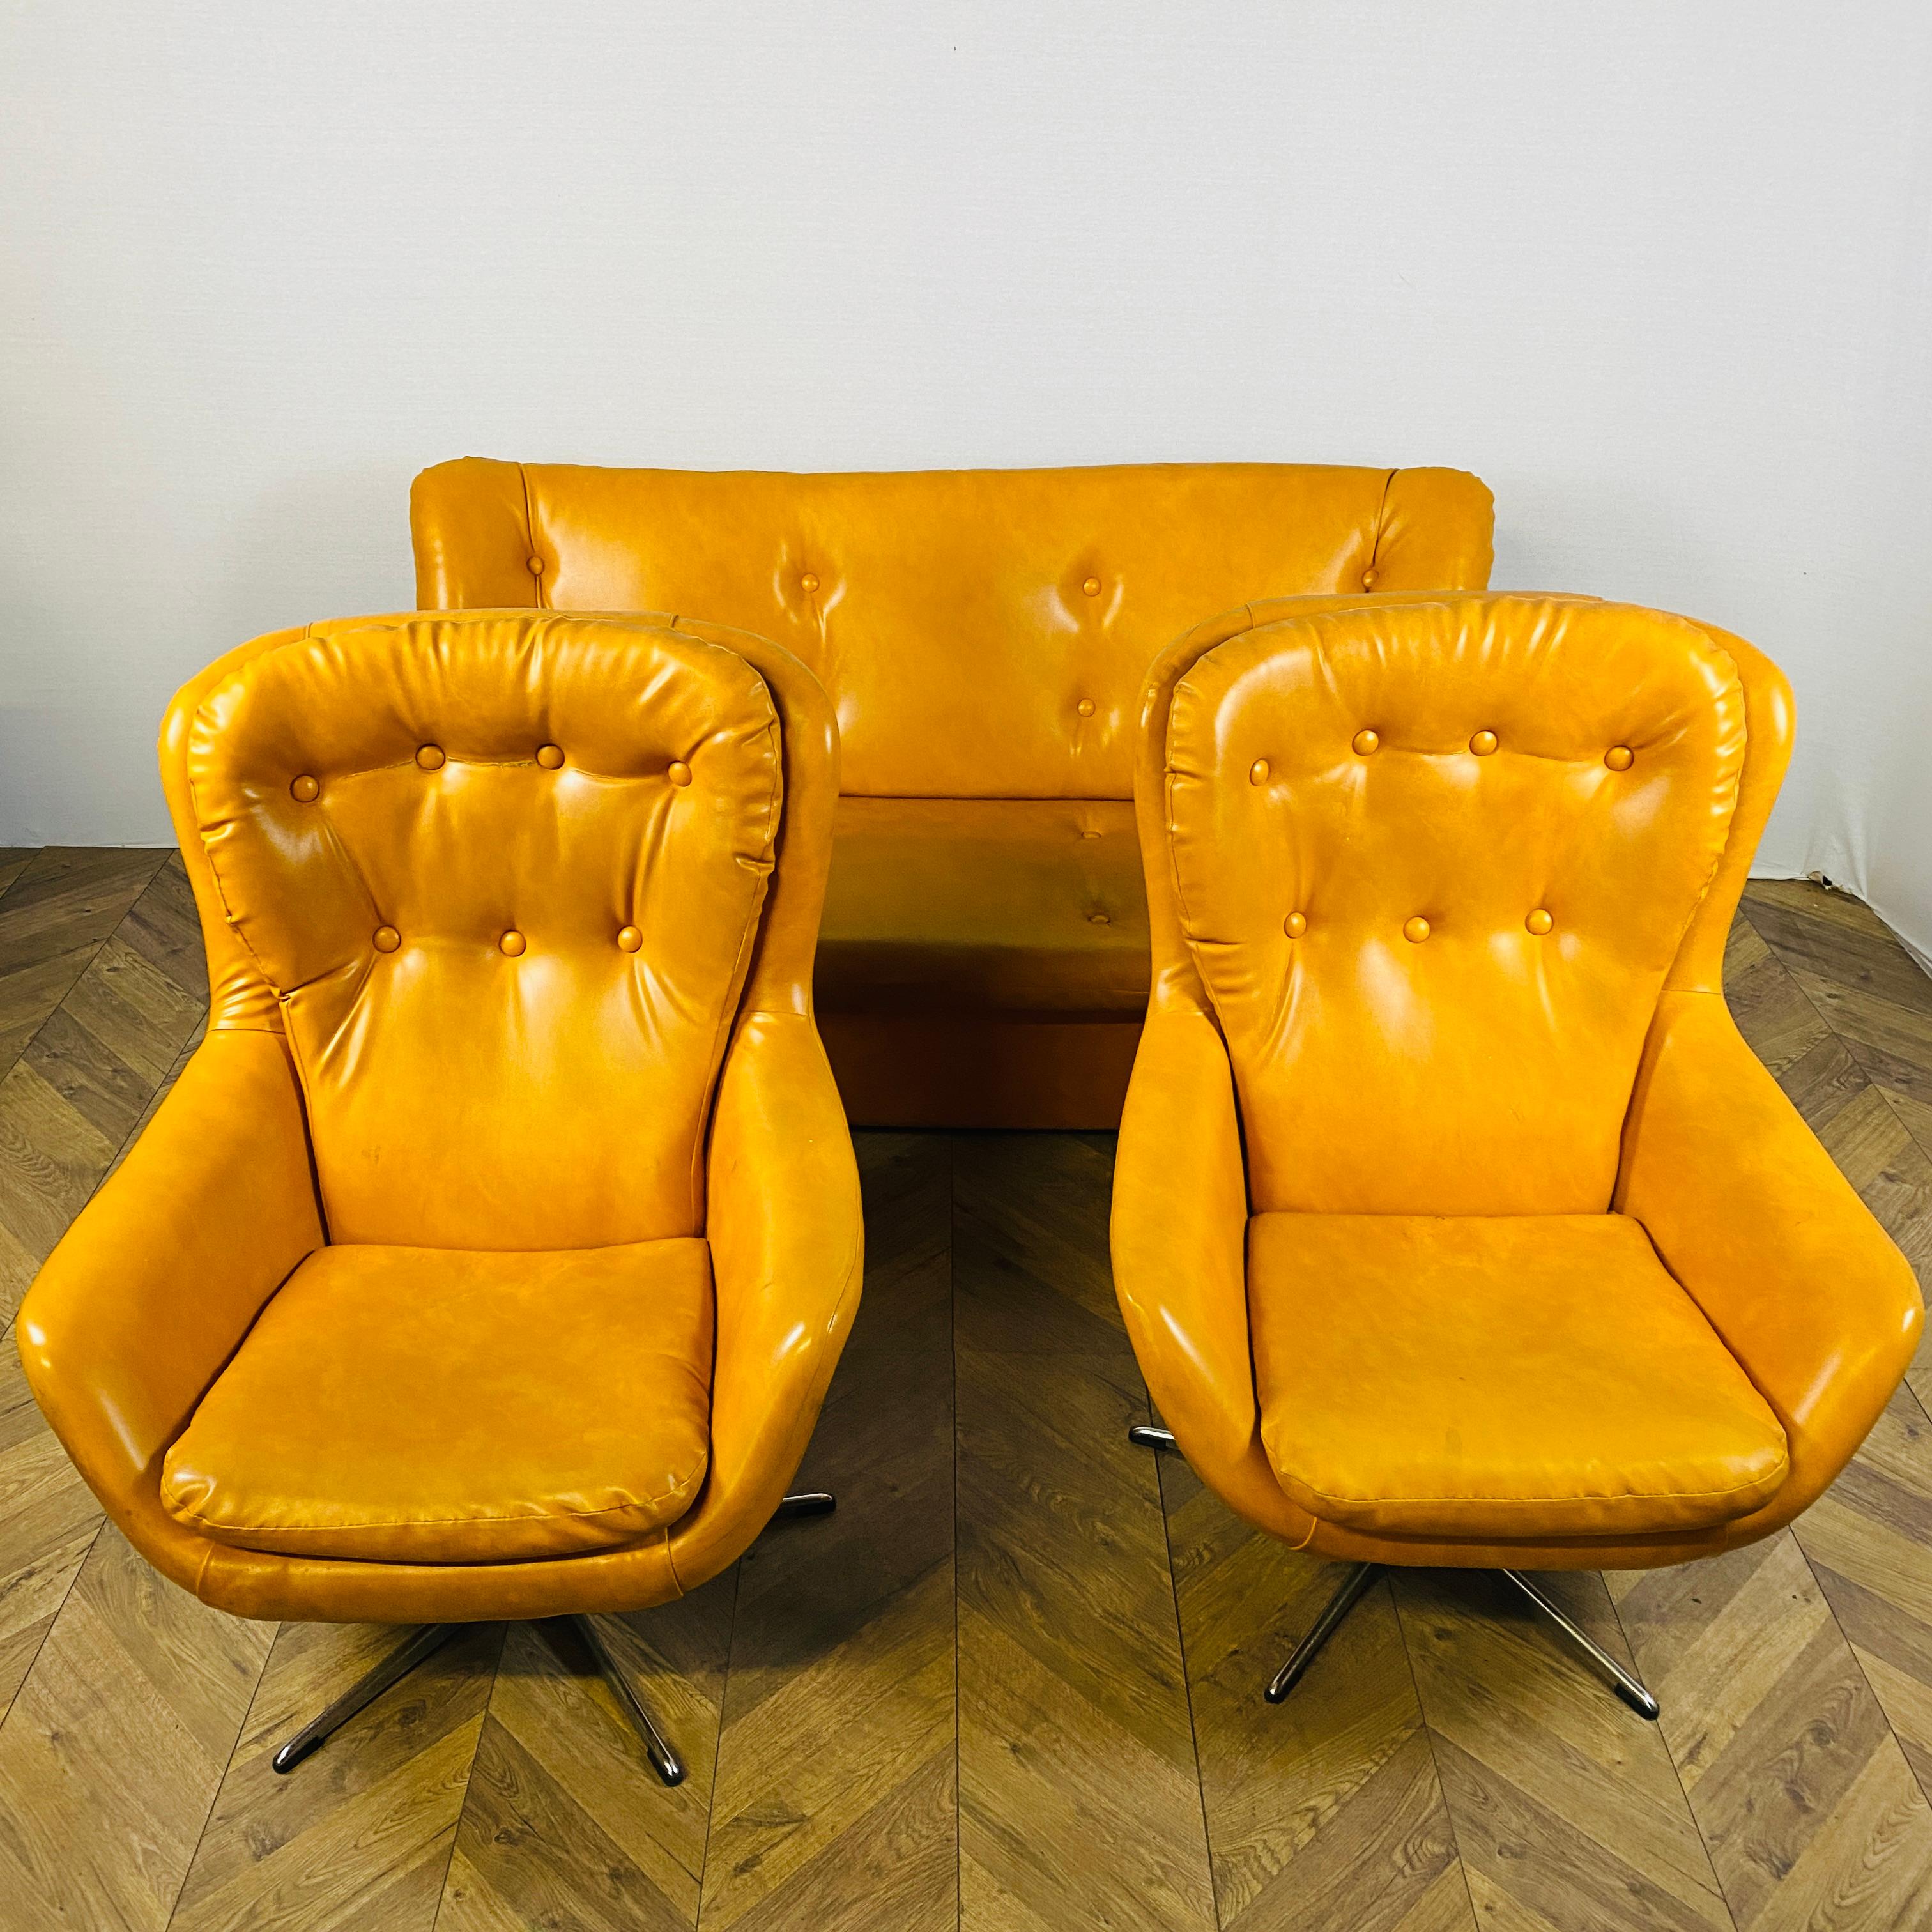 Wonderfully Retro sofa set, Consisting of a 2-seater sofa and 2 matching swivel egg chairs on chrome legs. 

The set is made from a light tan vinyl material and in good vintage condition, with only slight marks and scuffs, in-keeping with their